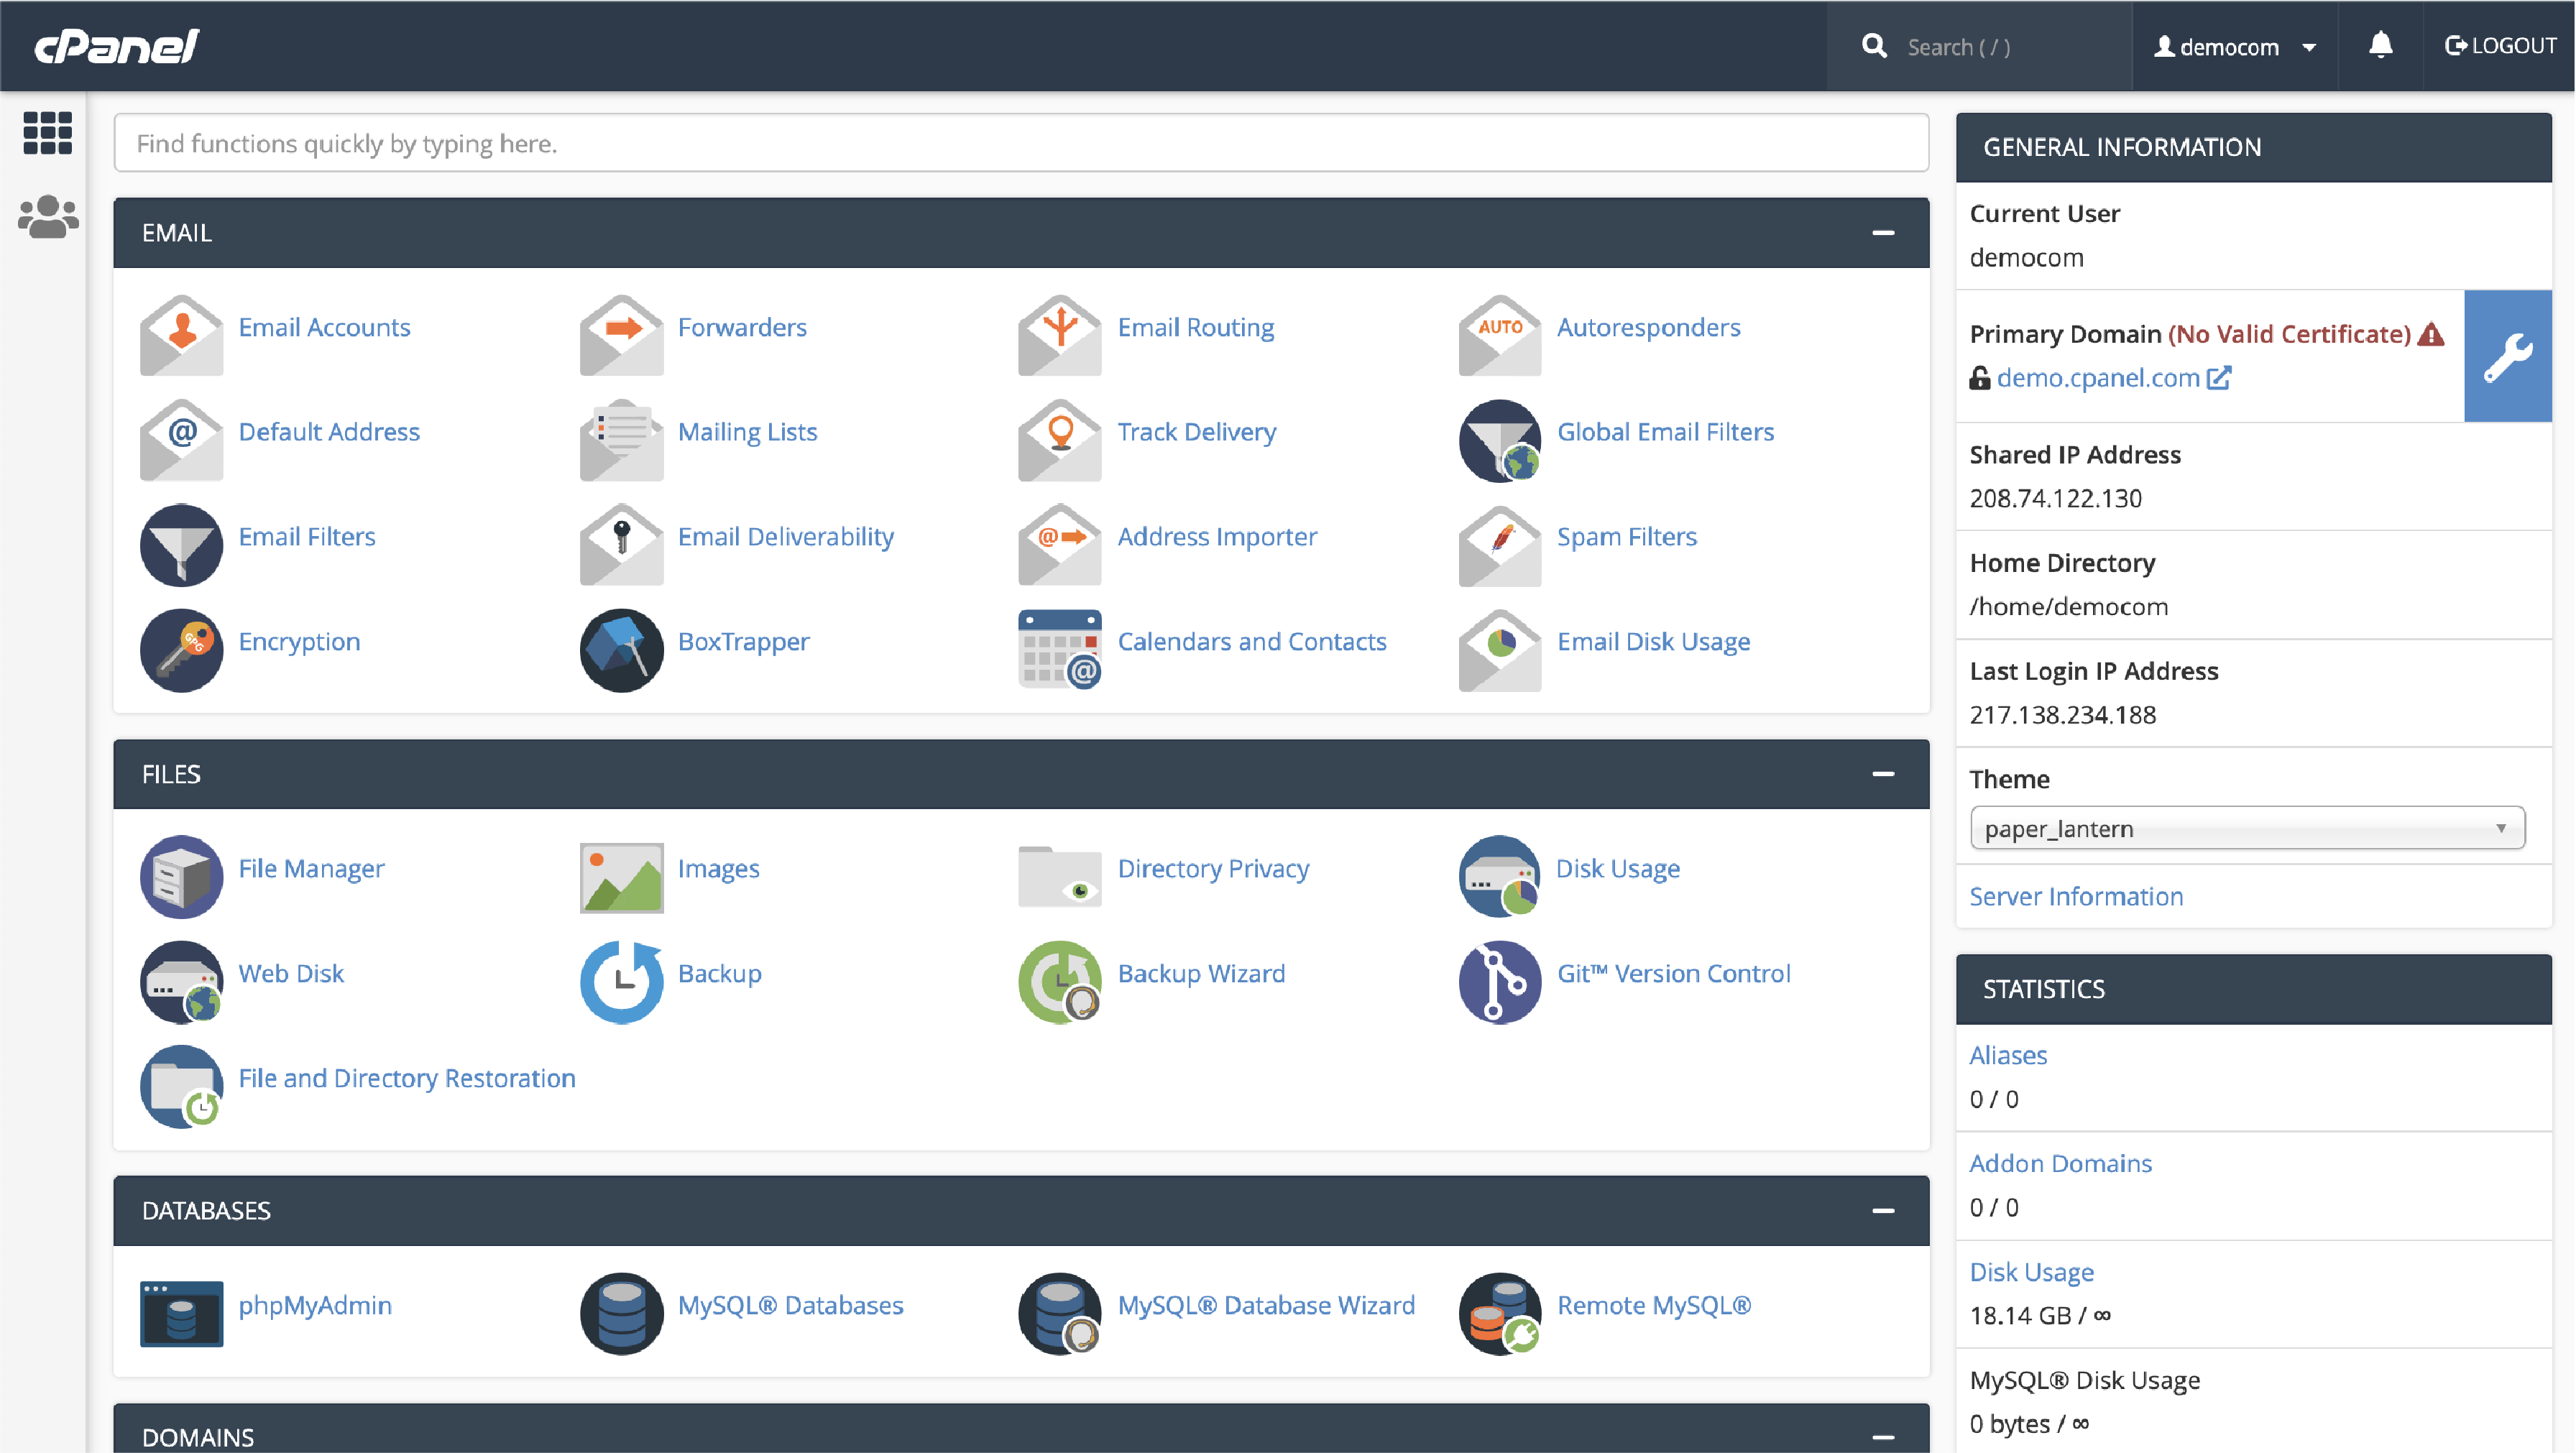 cPanel dashboard with various tools for managing websites, databases, and email accounts.